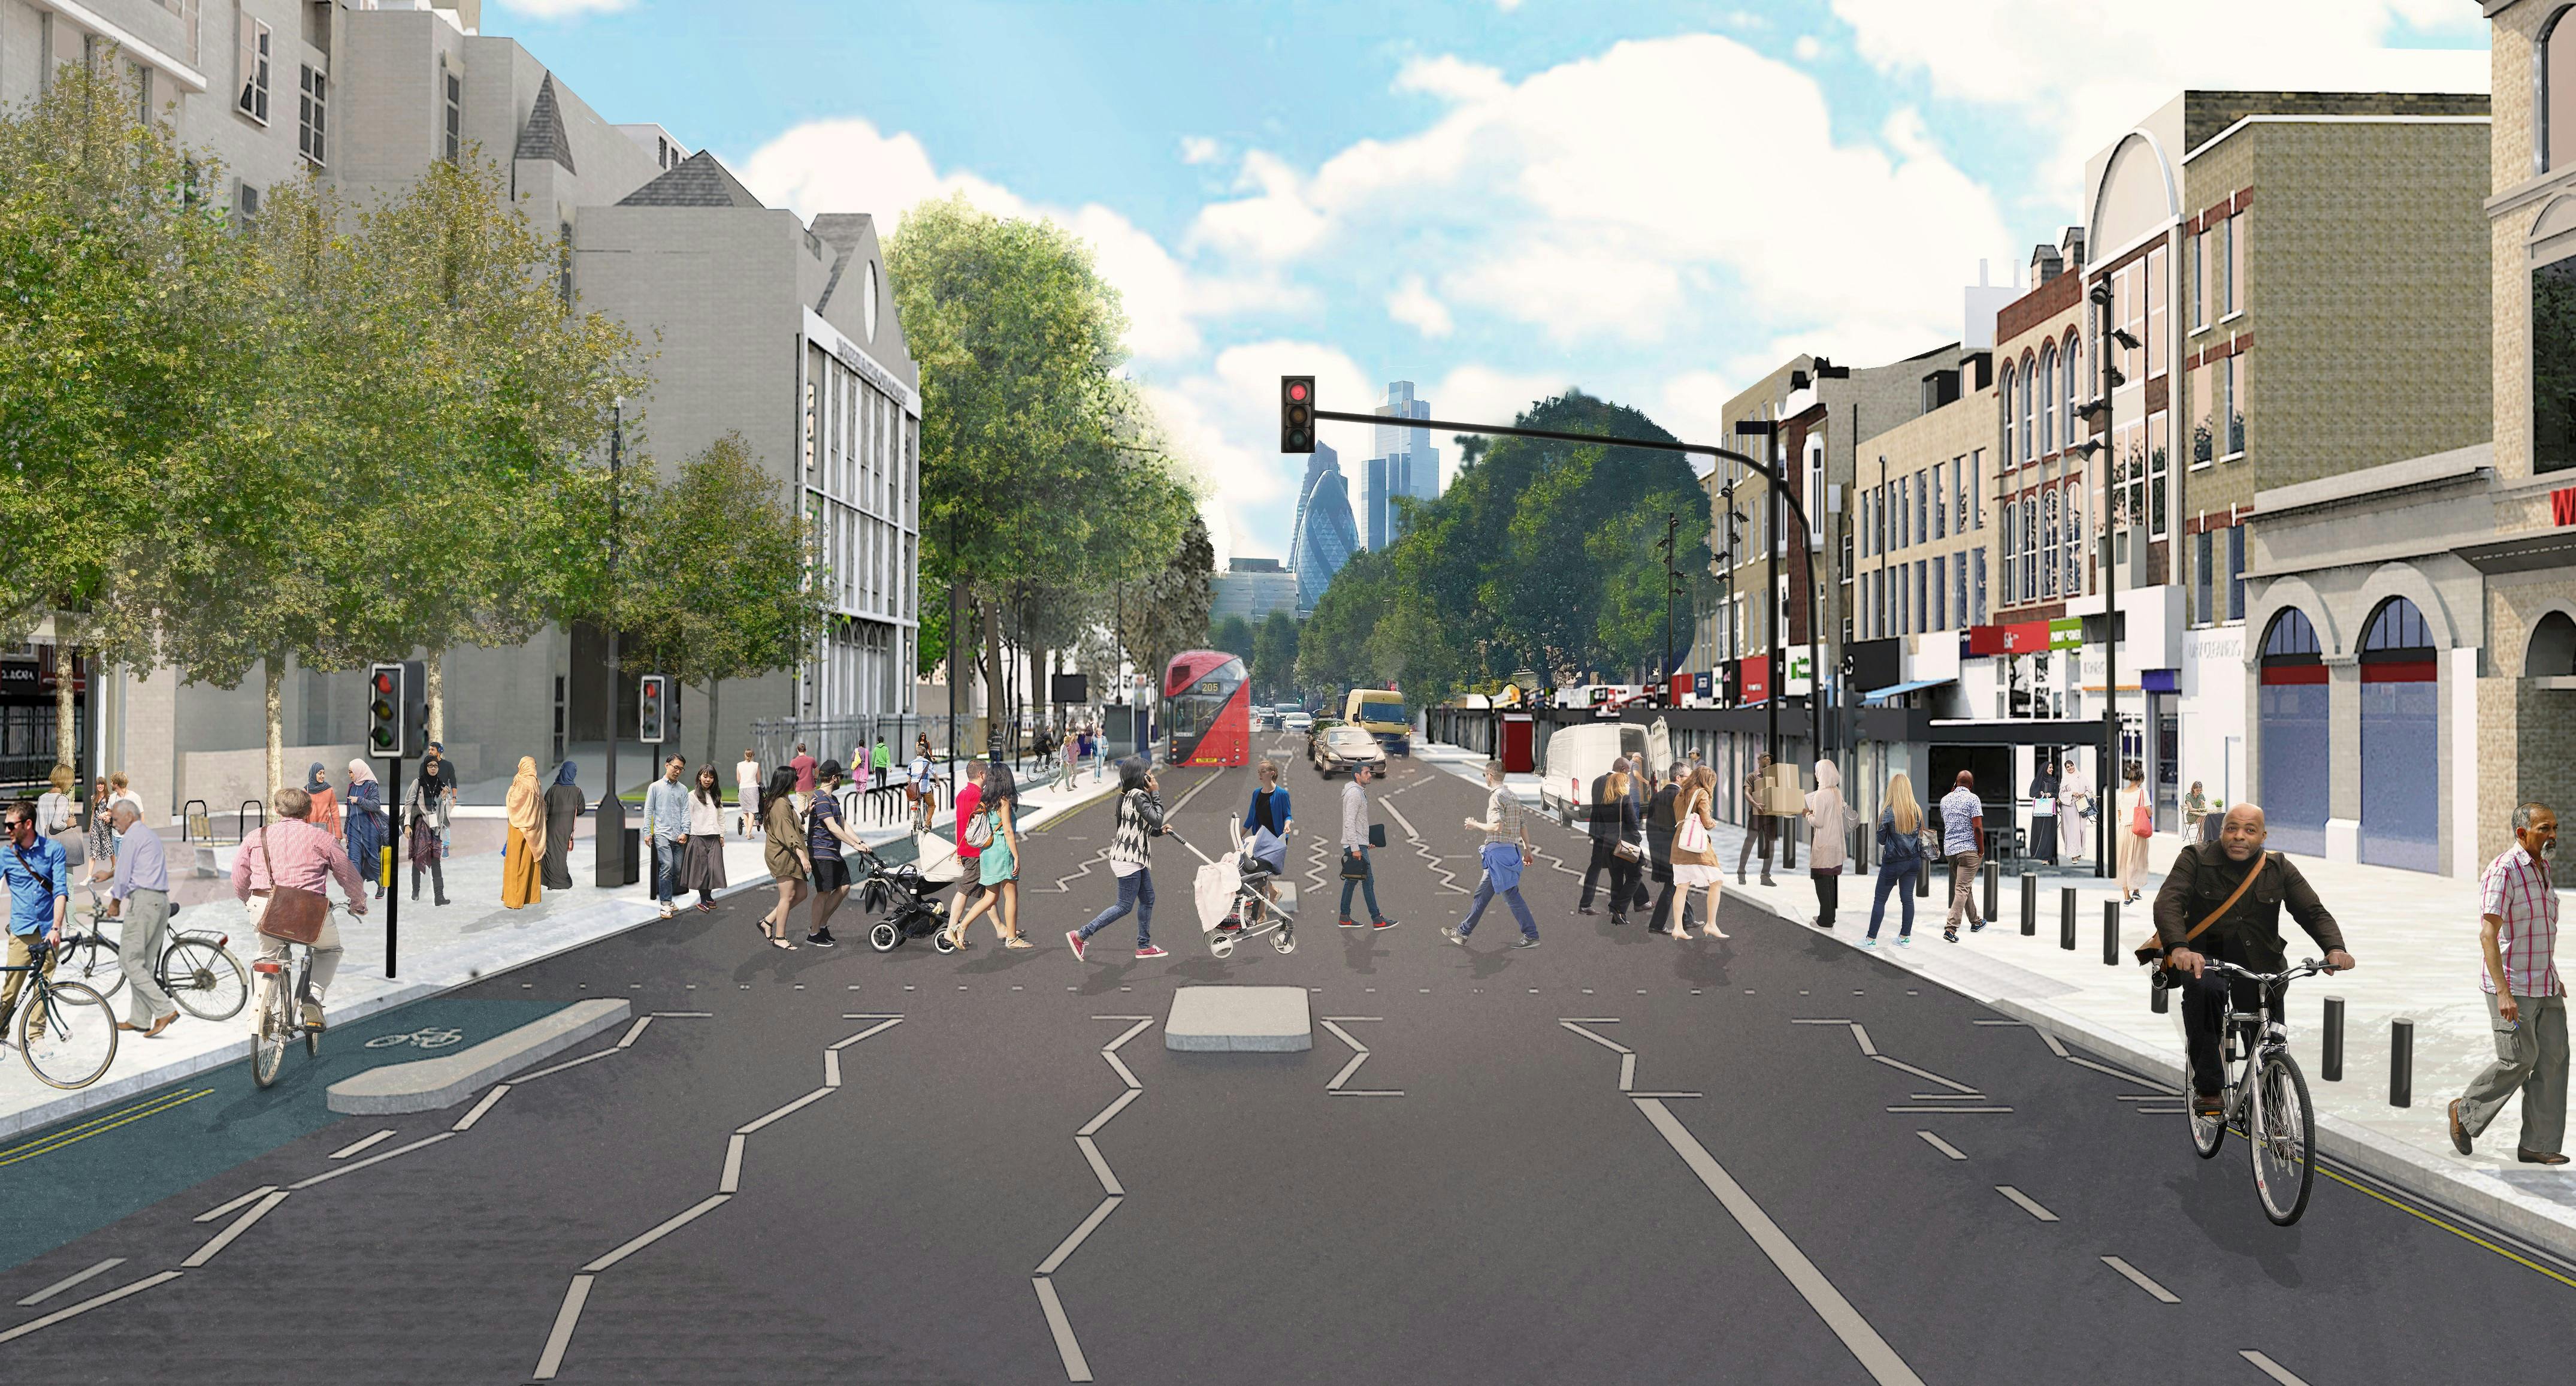 Proposed view looking west along Whitechapel Road.jpg